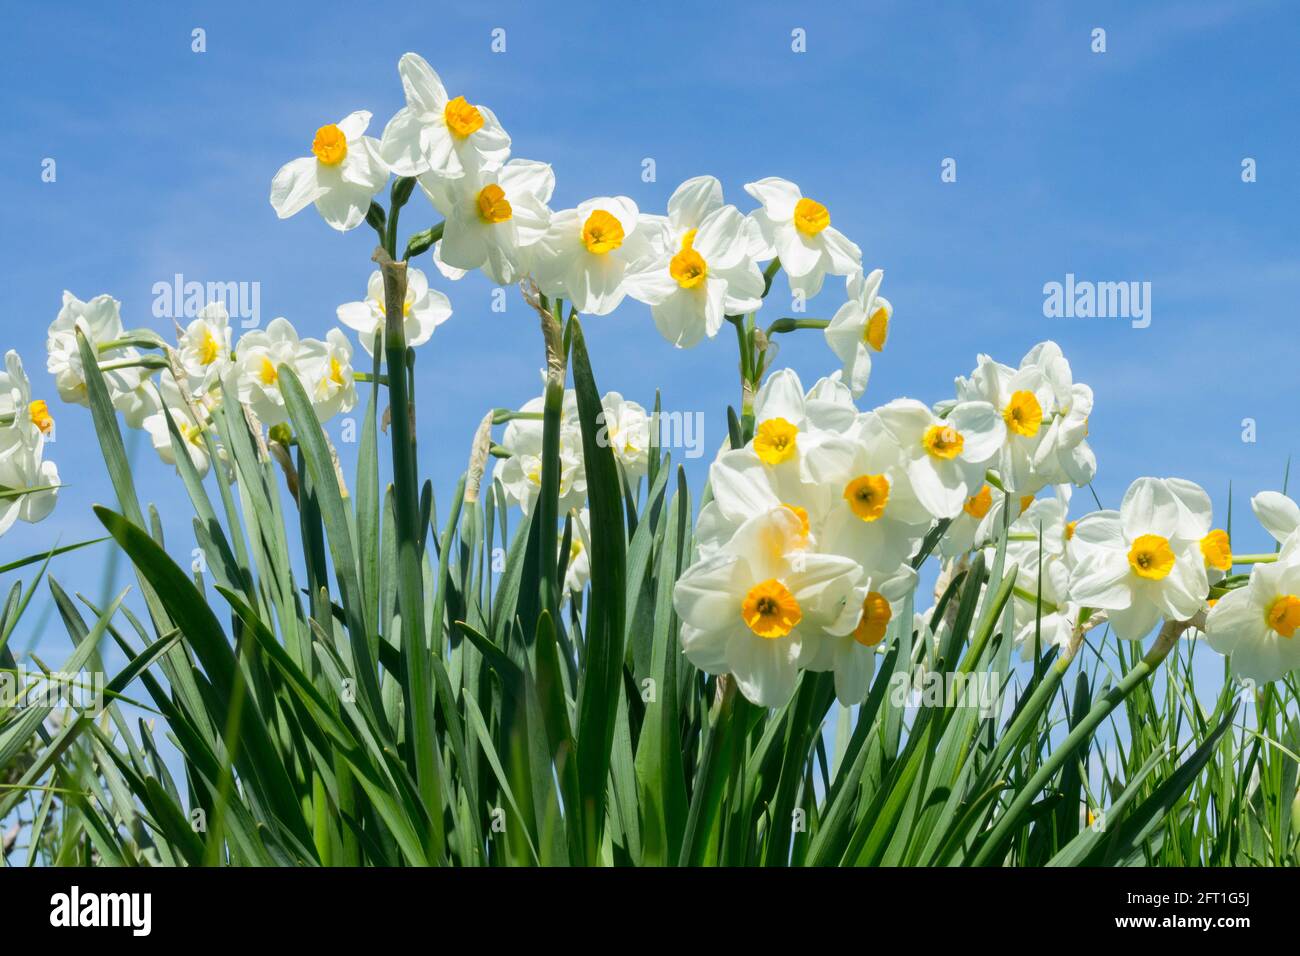 Spring White Daffodils Against blue sky Stock Photo